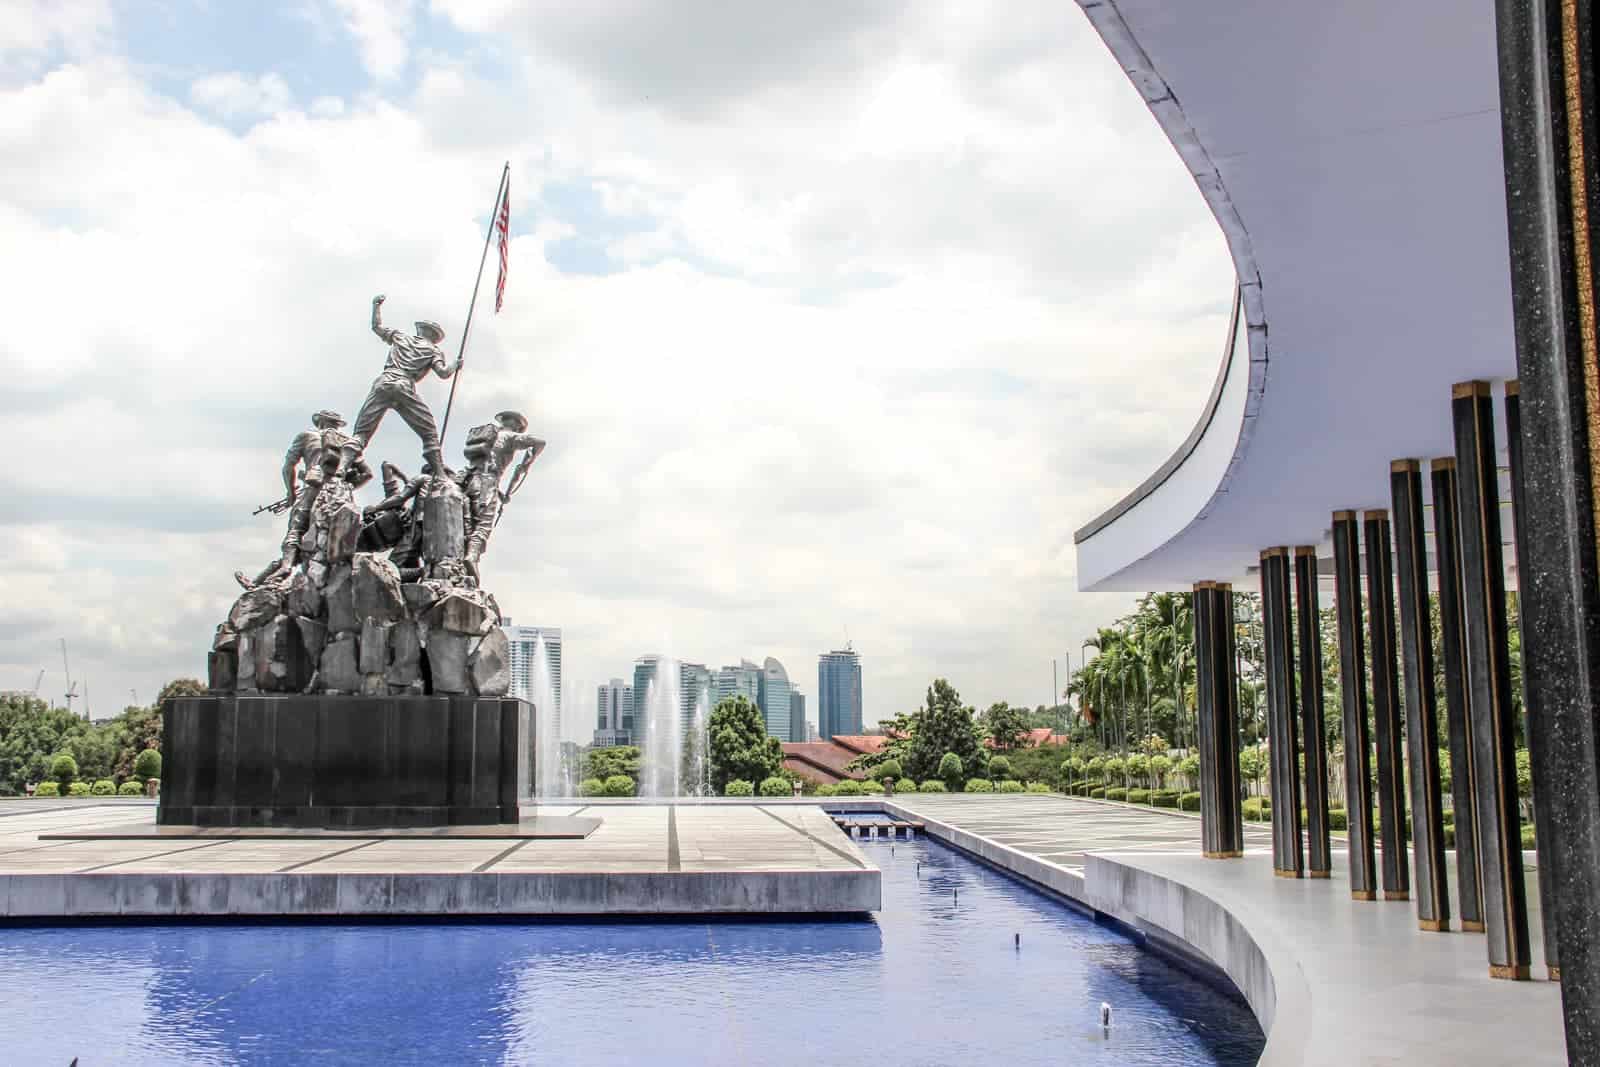 Visiting the National Monument bronze sculpture in Kuala Lumpur